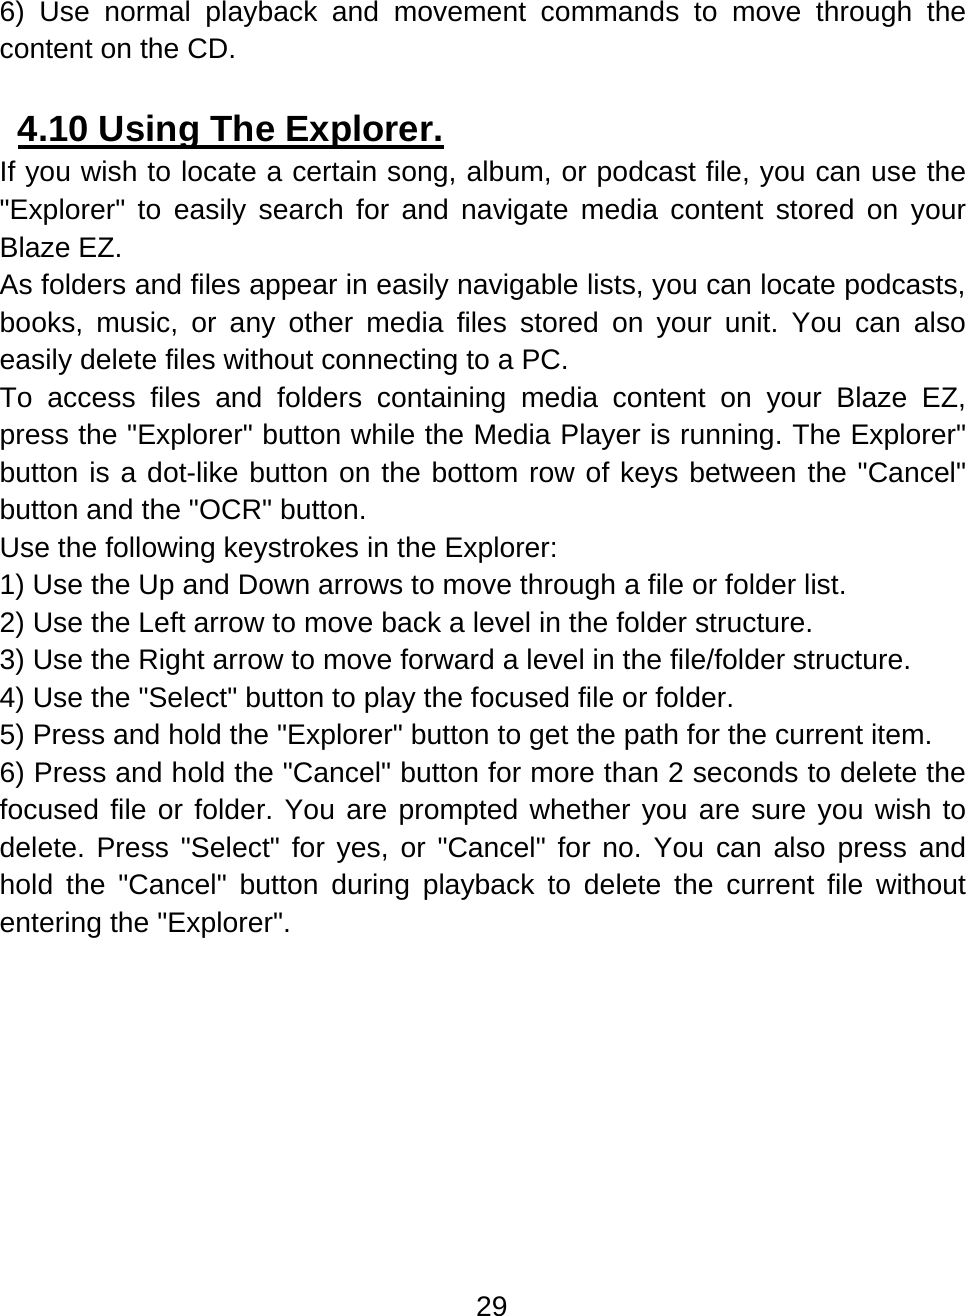 29  6) Use normal playback and movement commands to move through the content on the CD.  4.10 Using The Explorer.  If you wish to locate a certain song, album, or podcast file, you can use the &quot;Explorer&quot; to easily search for and navigate media content stored on your Blaze EZ. As folders and files appear in easily navigable lists, you can locate podcasts, books, music, or any other media files stored on your unit. You can also easily delete files without connecting to a PC. To access files and folders containing media content on your Blaze EZ, press the &quot;Explorer&quot; button while the Media Player is running. The Explorer&quot; button is a dot-like button on the bottom row of keys between the &quot;Cancel&quot; button and the &quot;OCR&quot; button. Use the following keystrokes in the Explorer: 1) Use the Up and Down arrows to move through a file or folder list. 2) Use the Left arrow to move back a level in the folder structure. 3) Use the Right arrow to move forward a level in the file/folder structure. 4) Use the &quot;Select&quot; button to play the focused file or folder. 5) Press and hold the &quot;Explorer&quot; button to get the path for the current item. 6) Press and hold the &quot;Cancel&quot; button for more than 2 seconds to delete the focused file or folder. You are prompted whether you are sure you wish to delete. Press &quot;Select&quot; for yes, or &quot;Cancel&quot; for no. You can also press and hold the &quot;Cancel&quot; button during playback to delete the current file without entering the &quot;Explorer&quot;.  